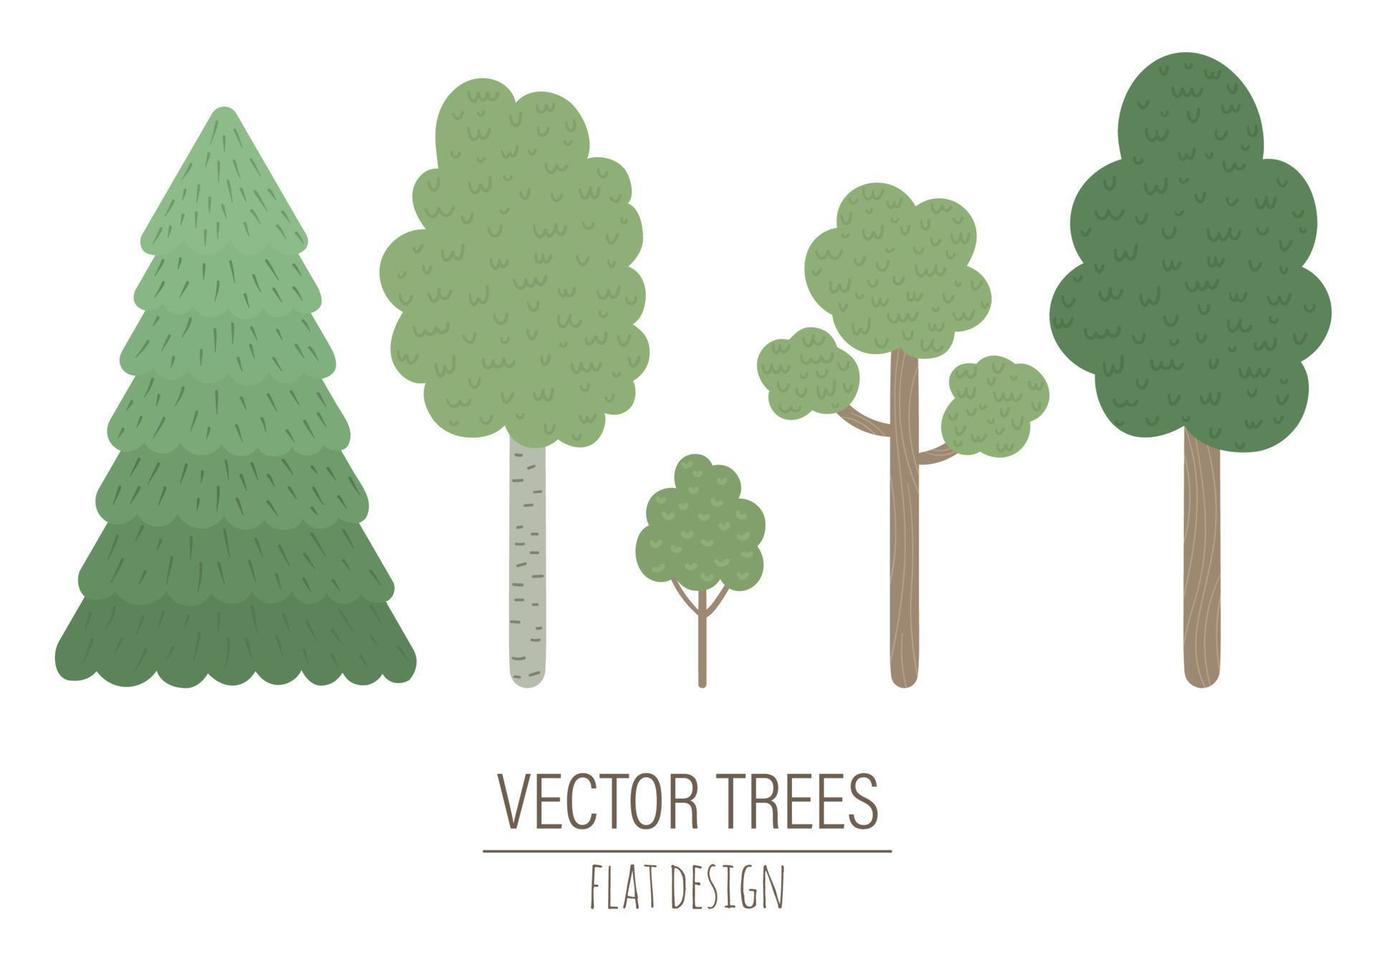 Vector set of hand drawn flat trees isolated on white background. Collection of forest plants for children design.